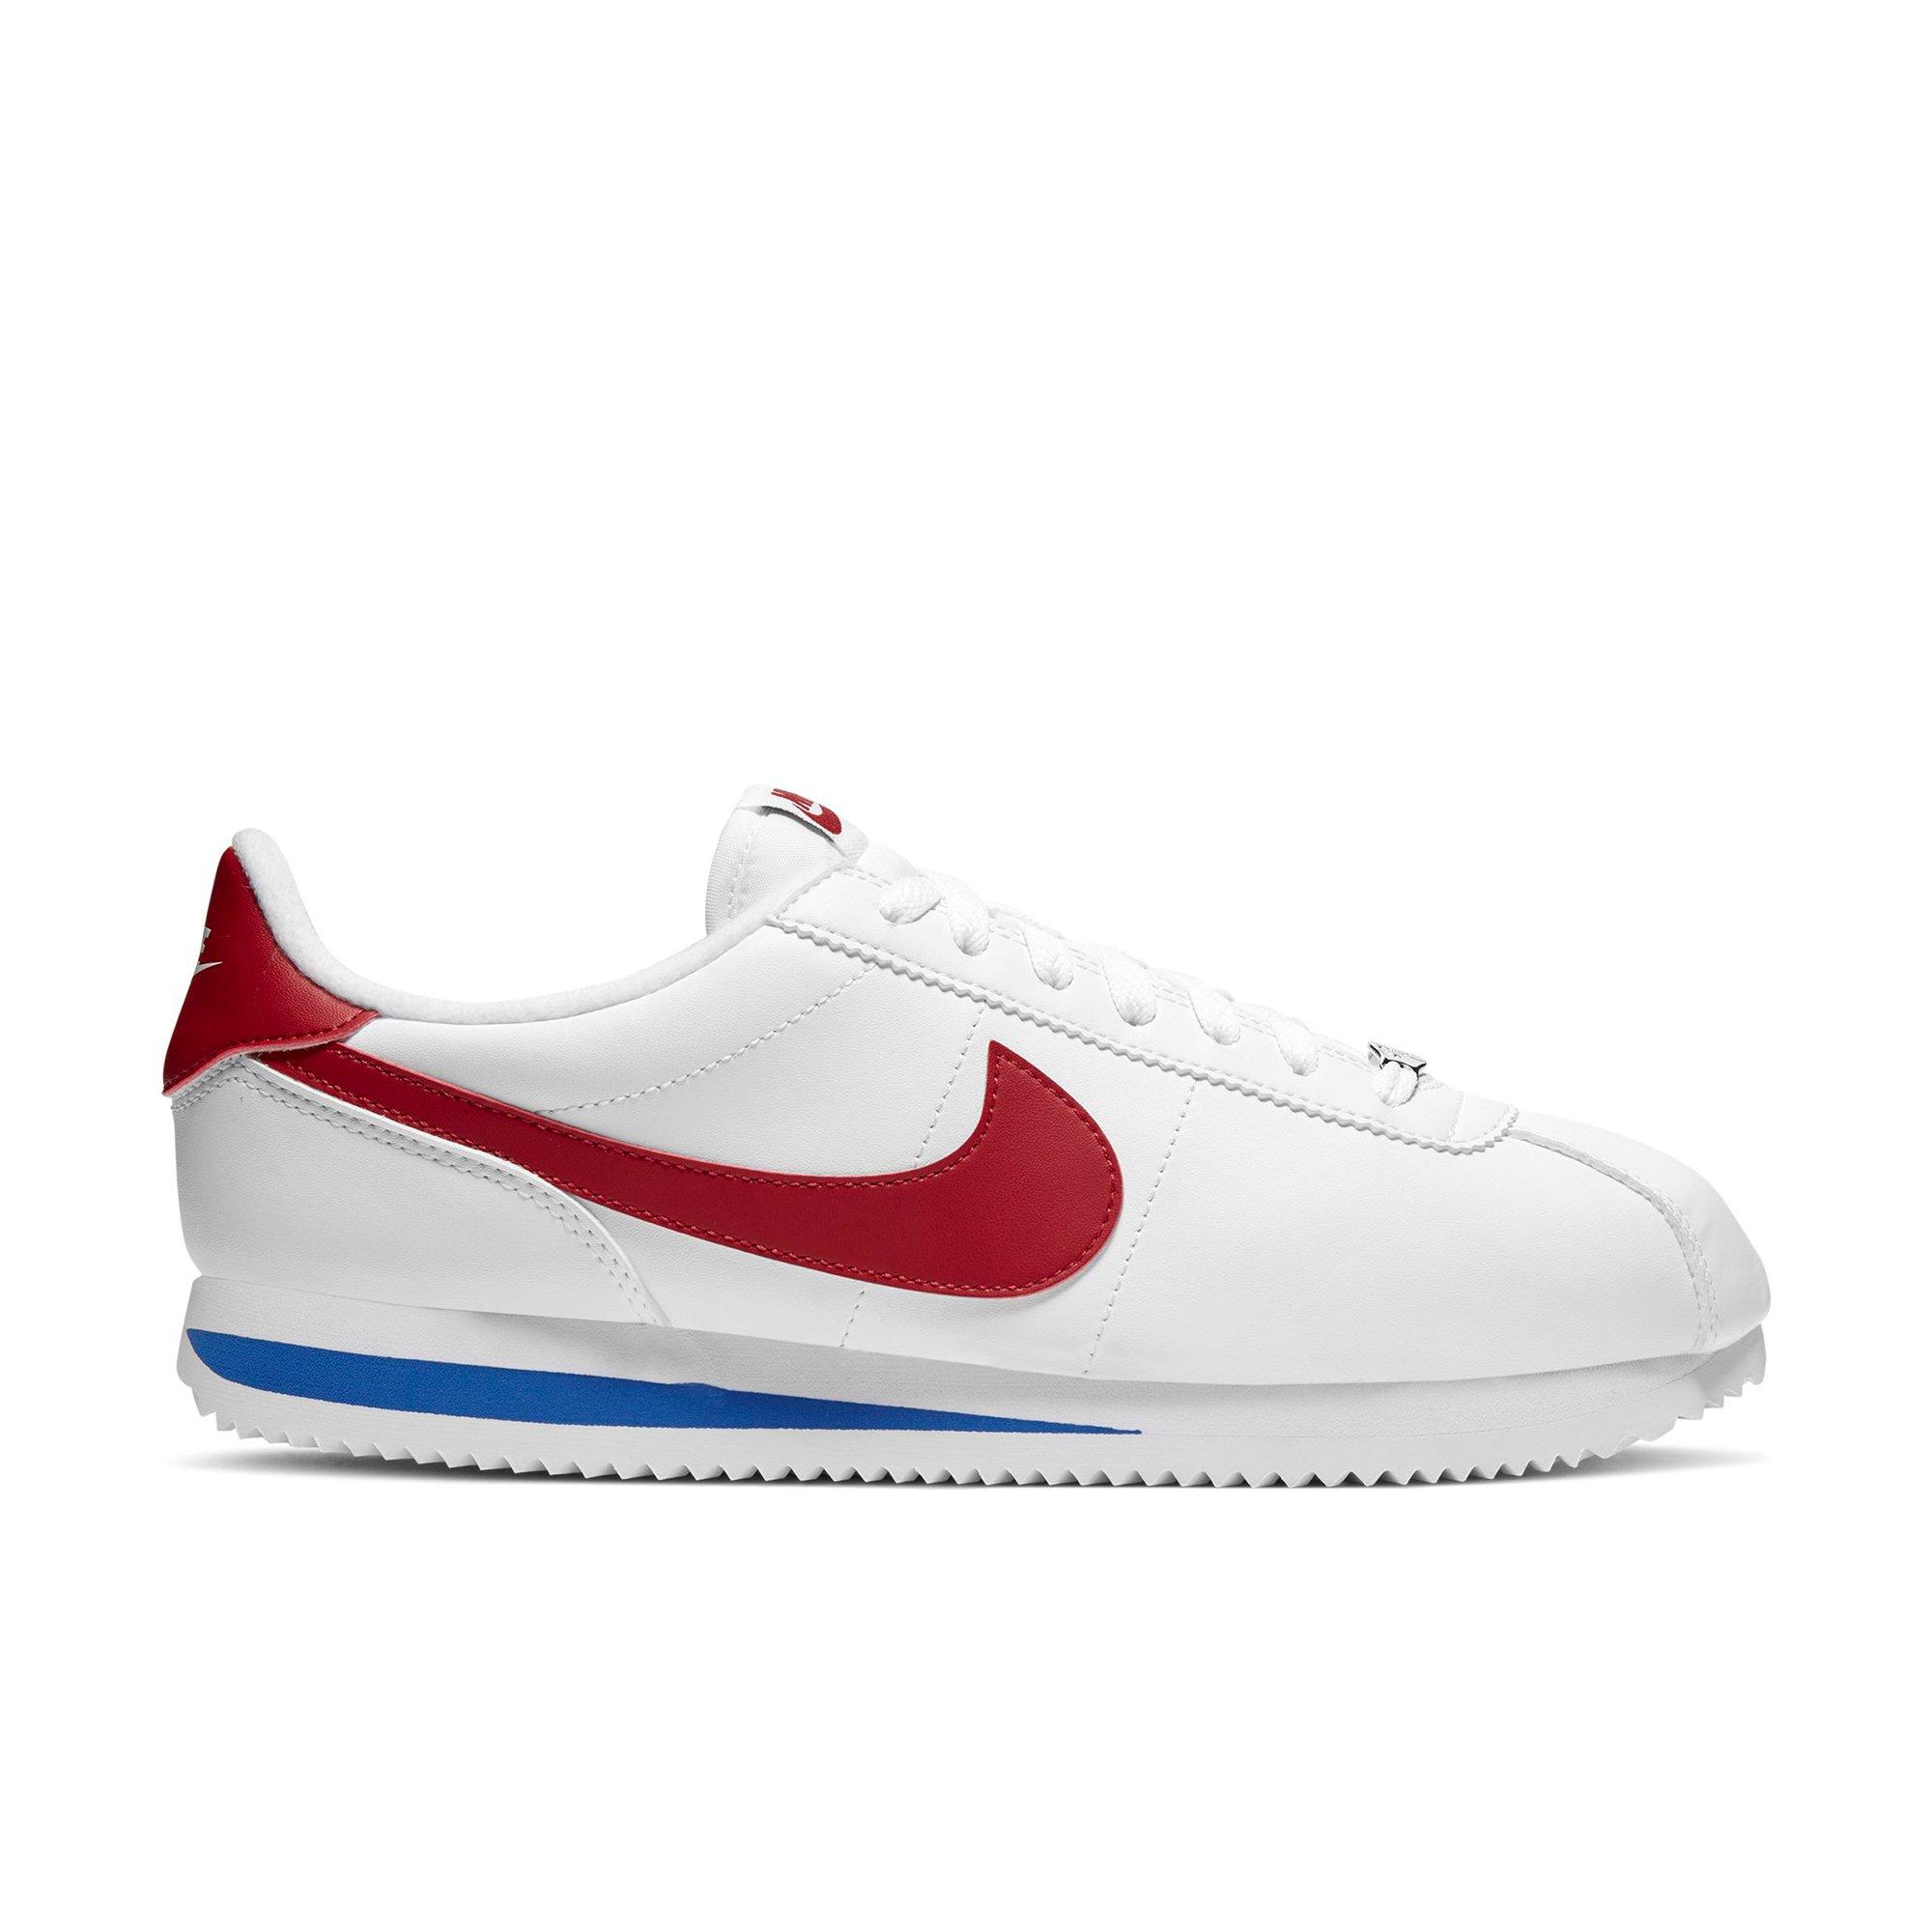 red blue white nike shoes